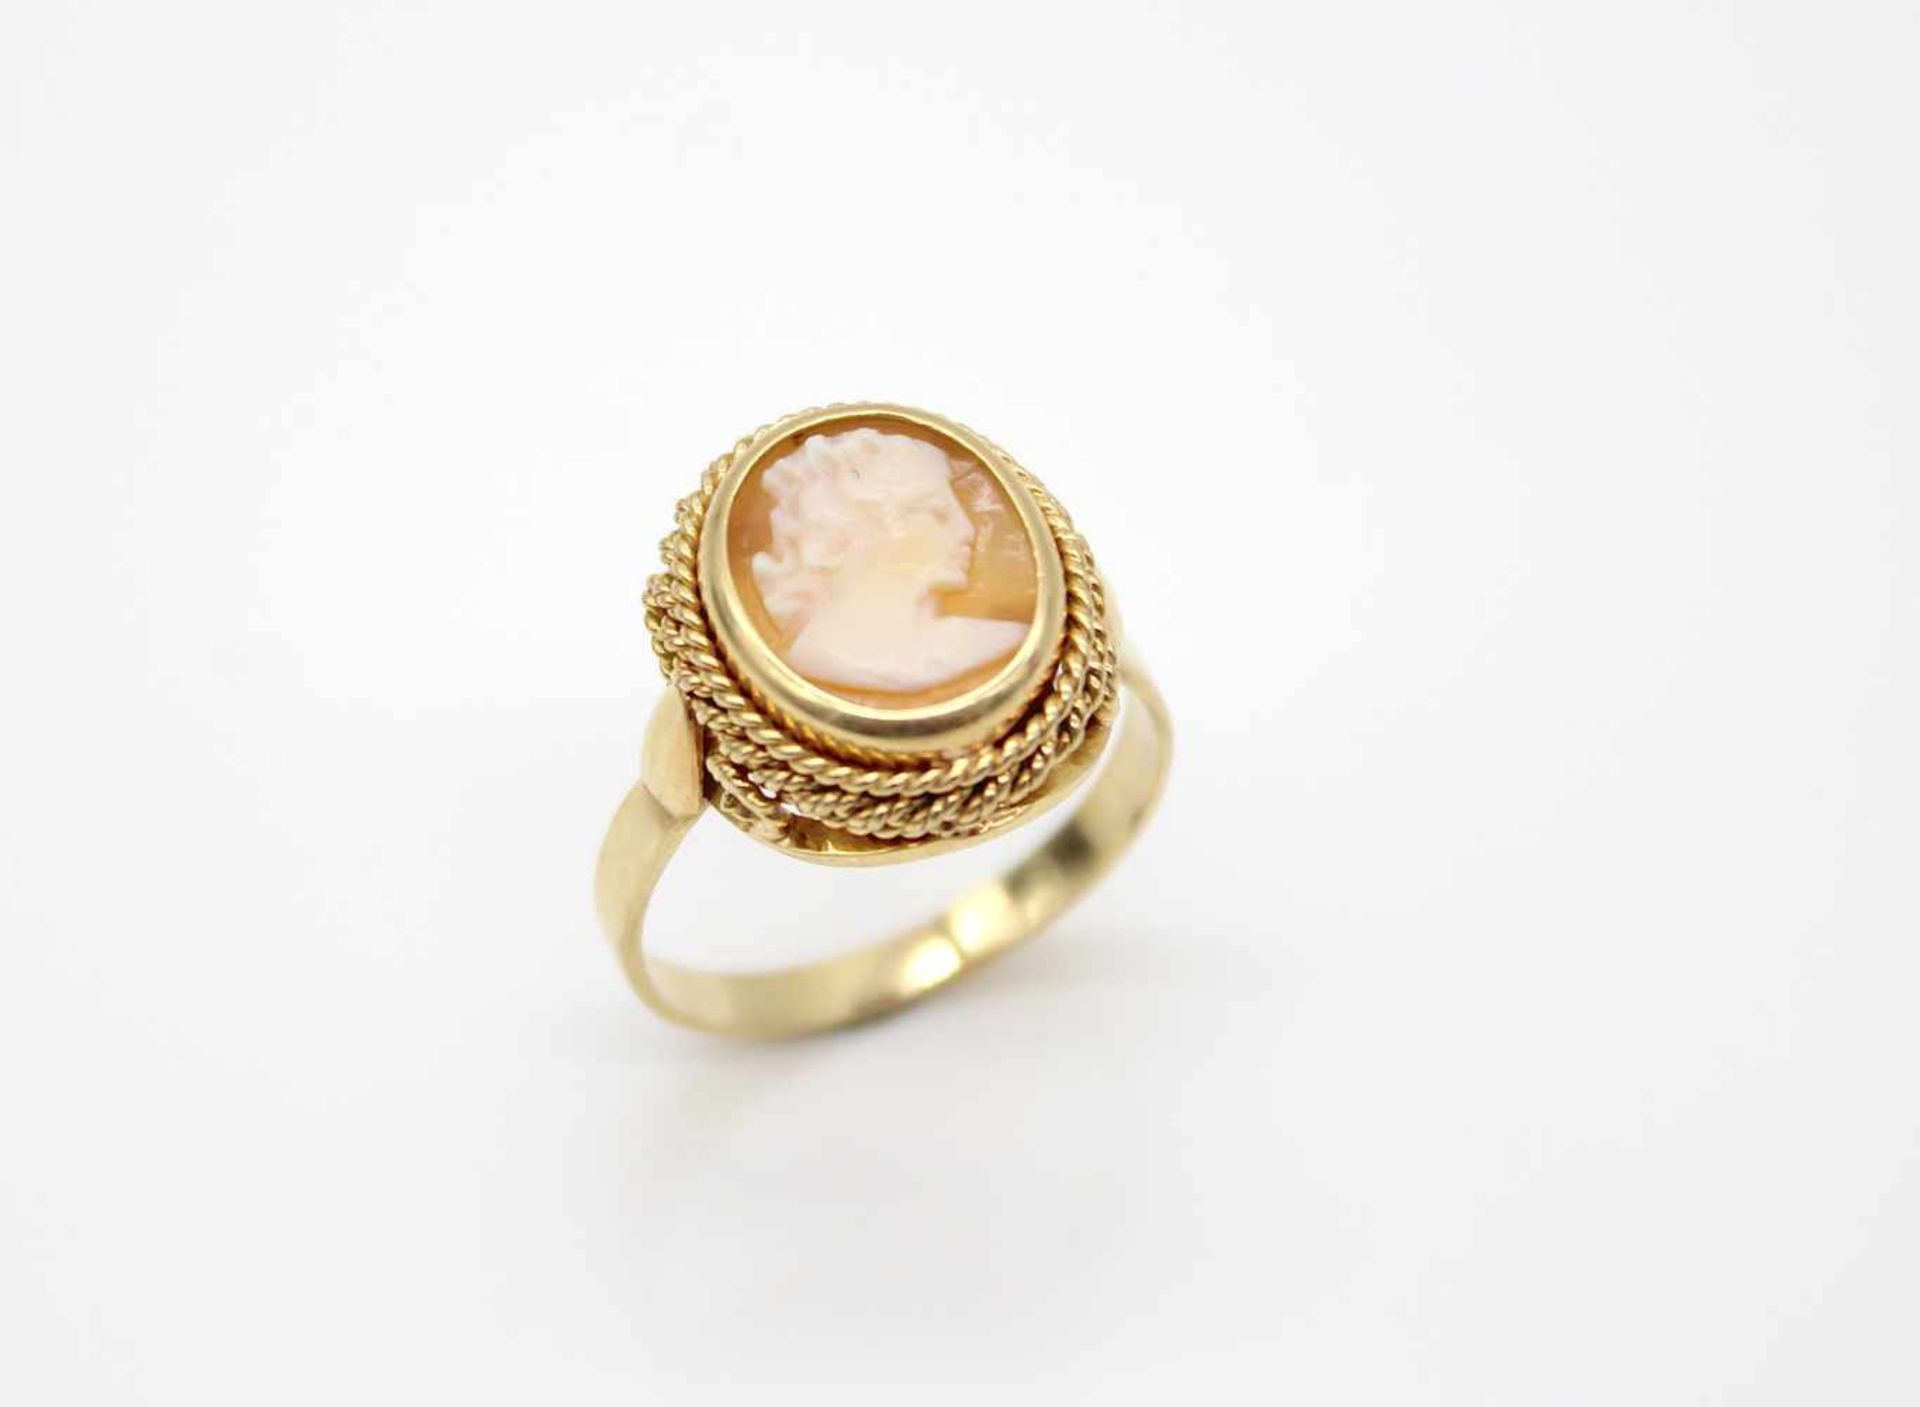 Ring of 585 gold with a cameo.Weight 4.1 g, size 58- - -15.00 % buyer's premium on the hammer - Bild 3 aus 3